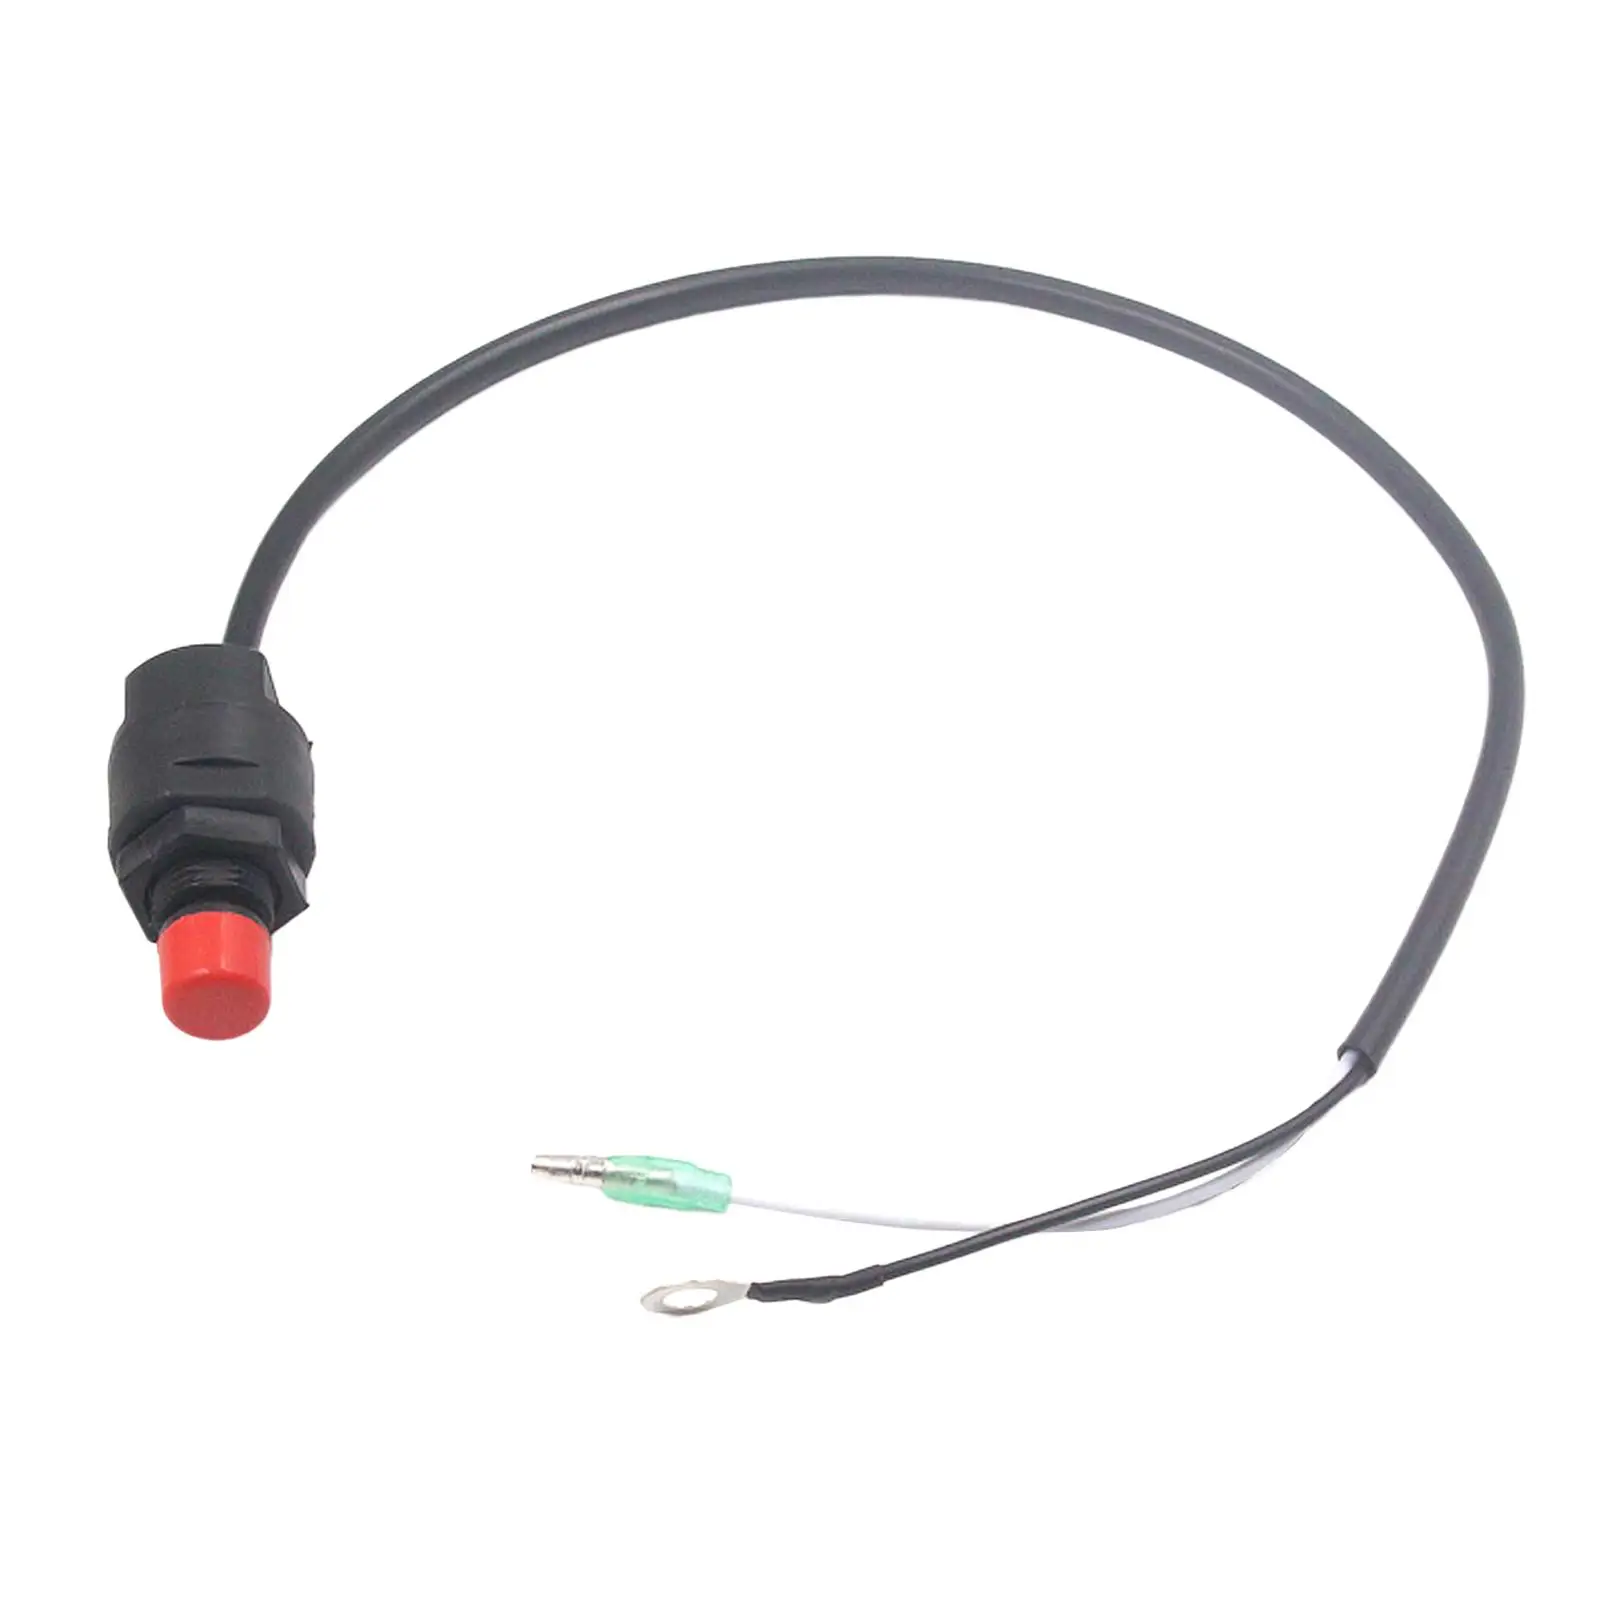 Durable Boat Outboard Kill Stop Switch Replaces Engine Motor Emergency Kill Stop Switch for Dirt Bike Parts Supplies